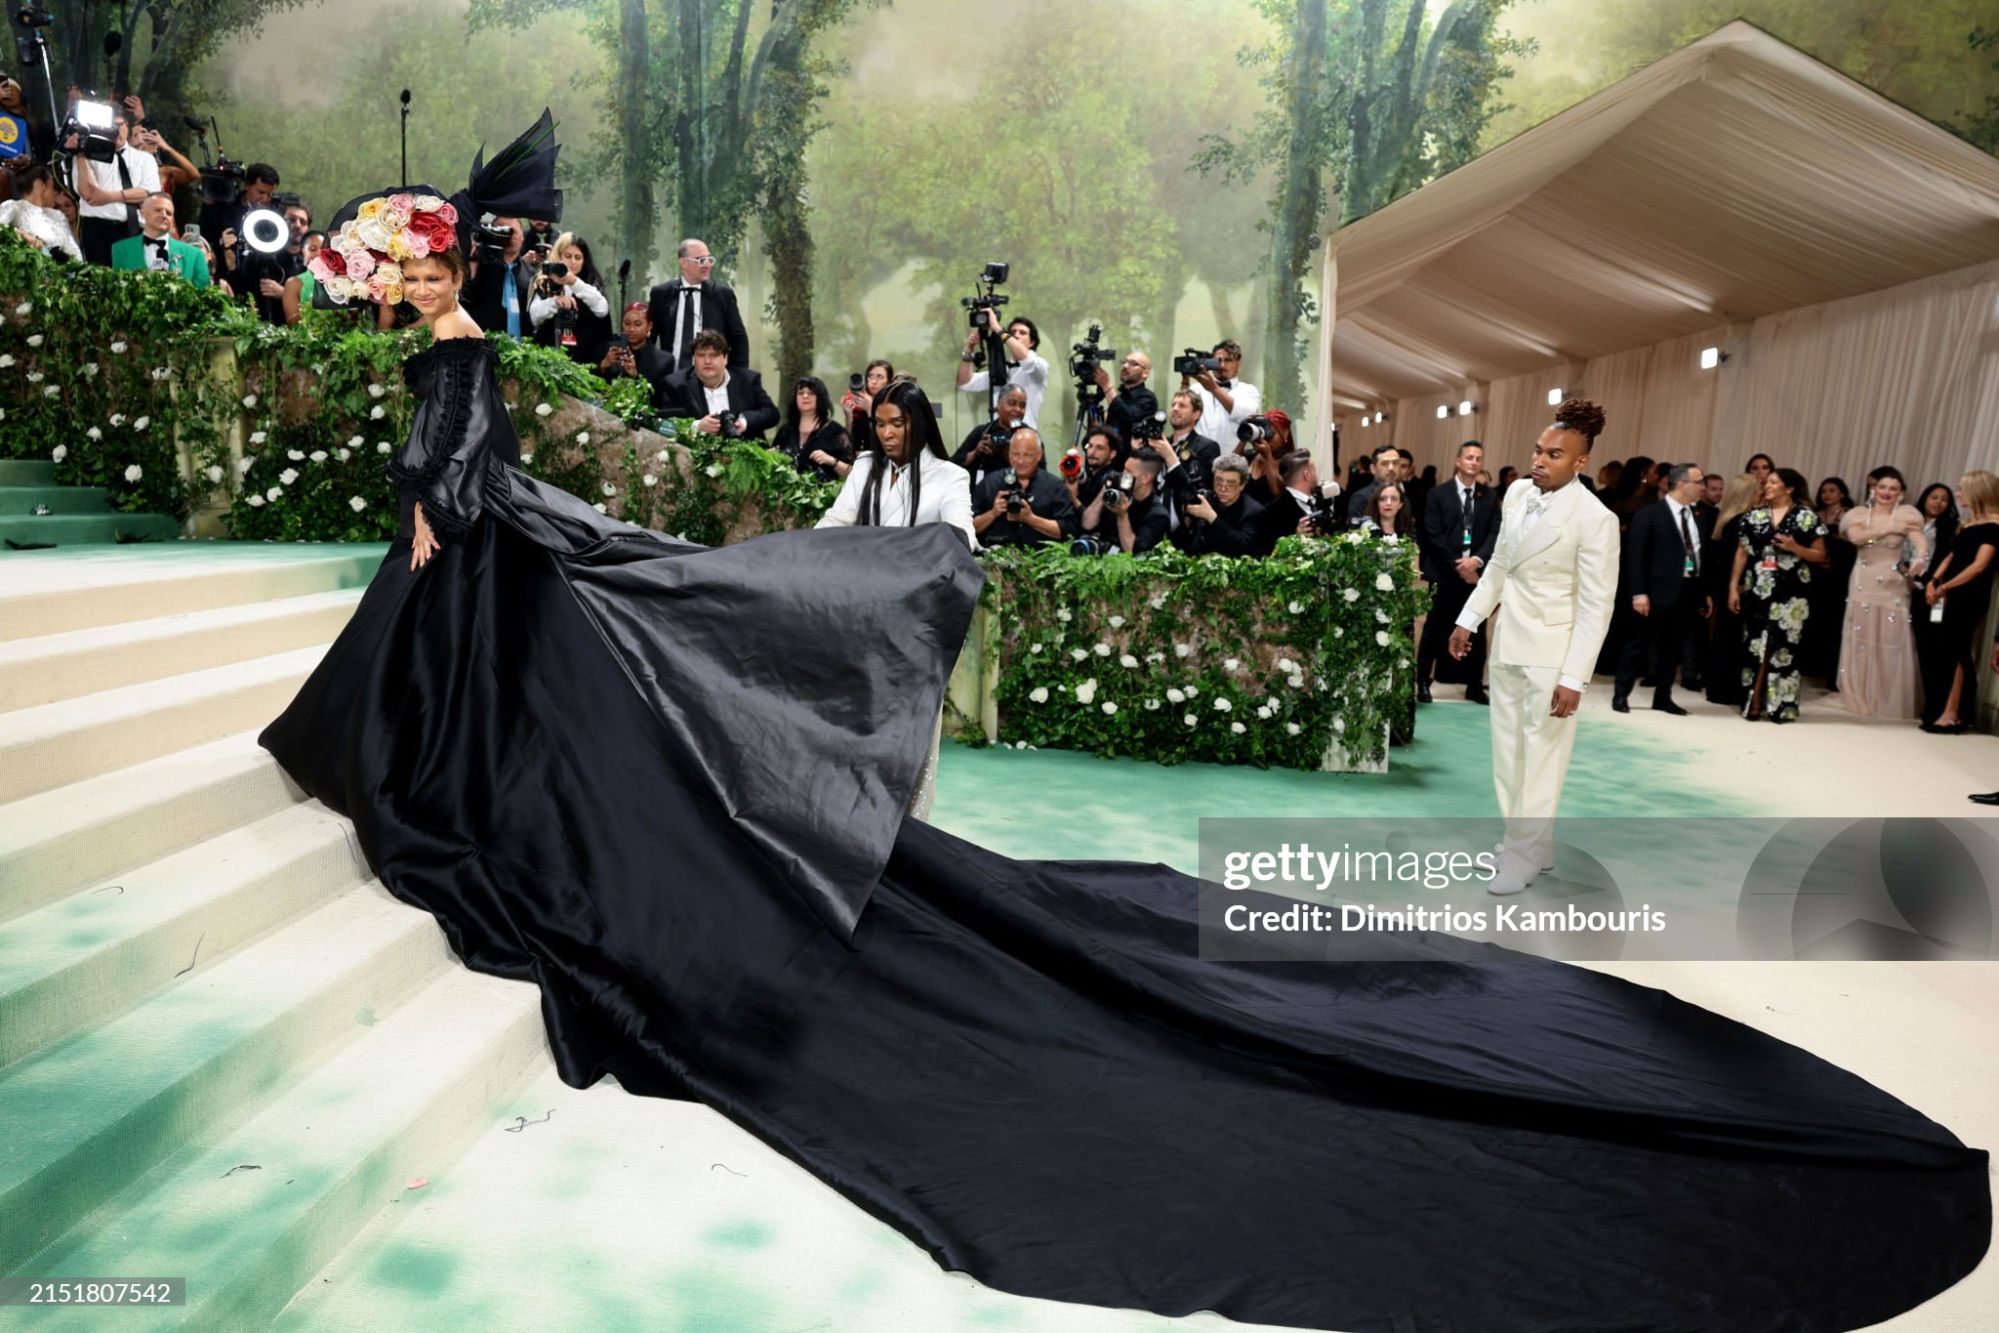 gettyimages-2151807542-2048x2048.jpg